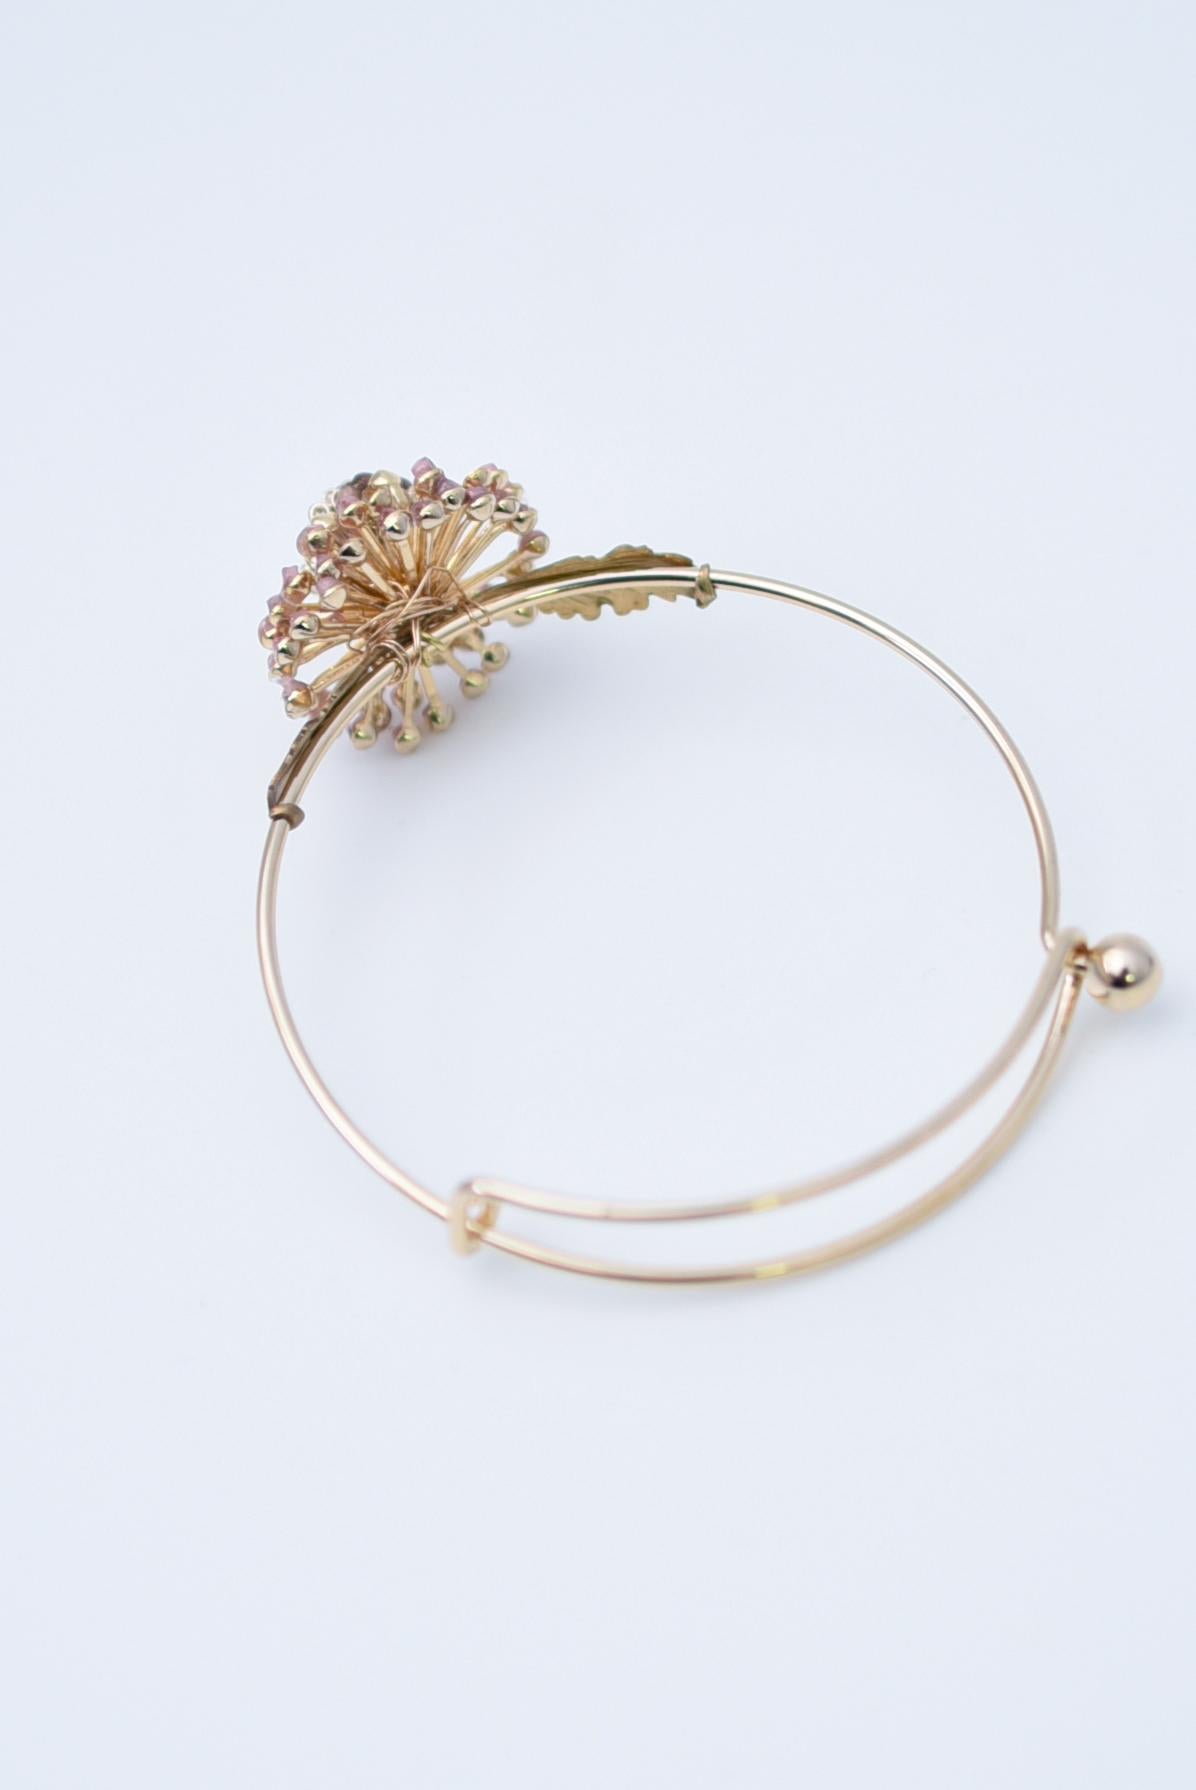 material:Brass, glass beads
size:around 20cm


It is easy to put on and take off.
The gold color of the bangle and the motif is consistent, so it does not look like a bangle that you are 